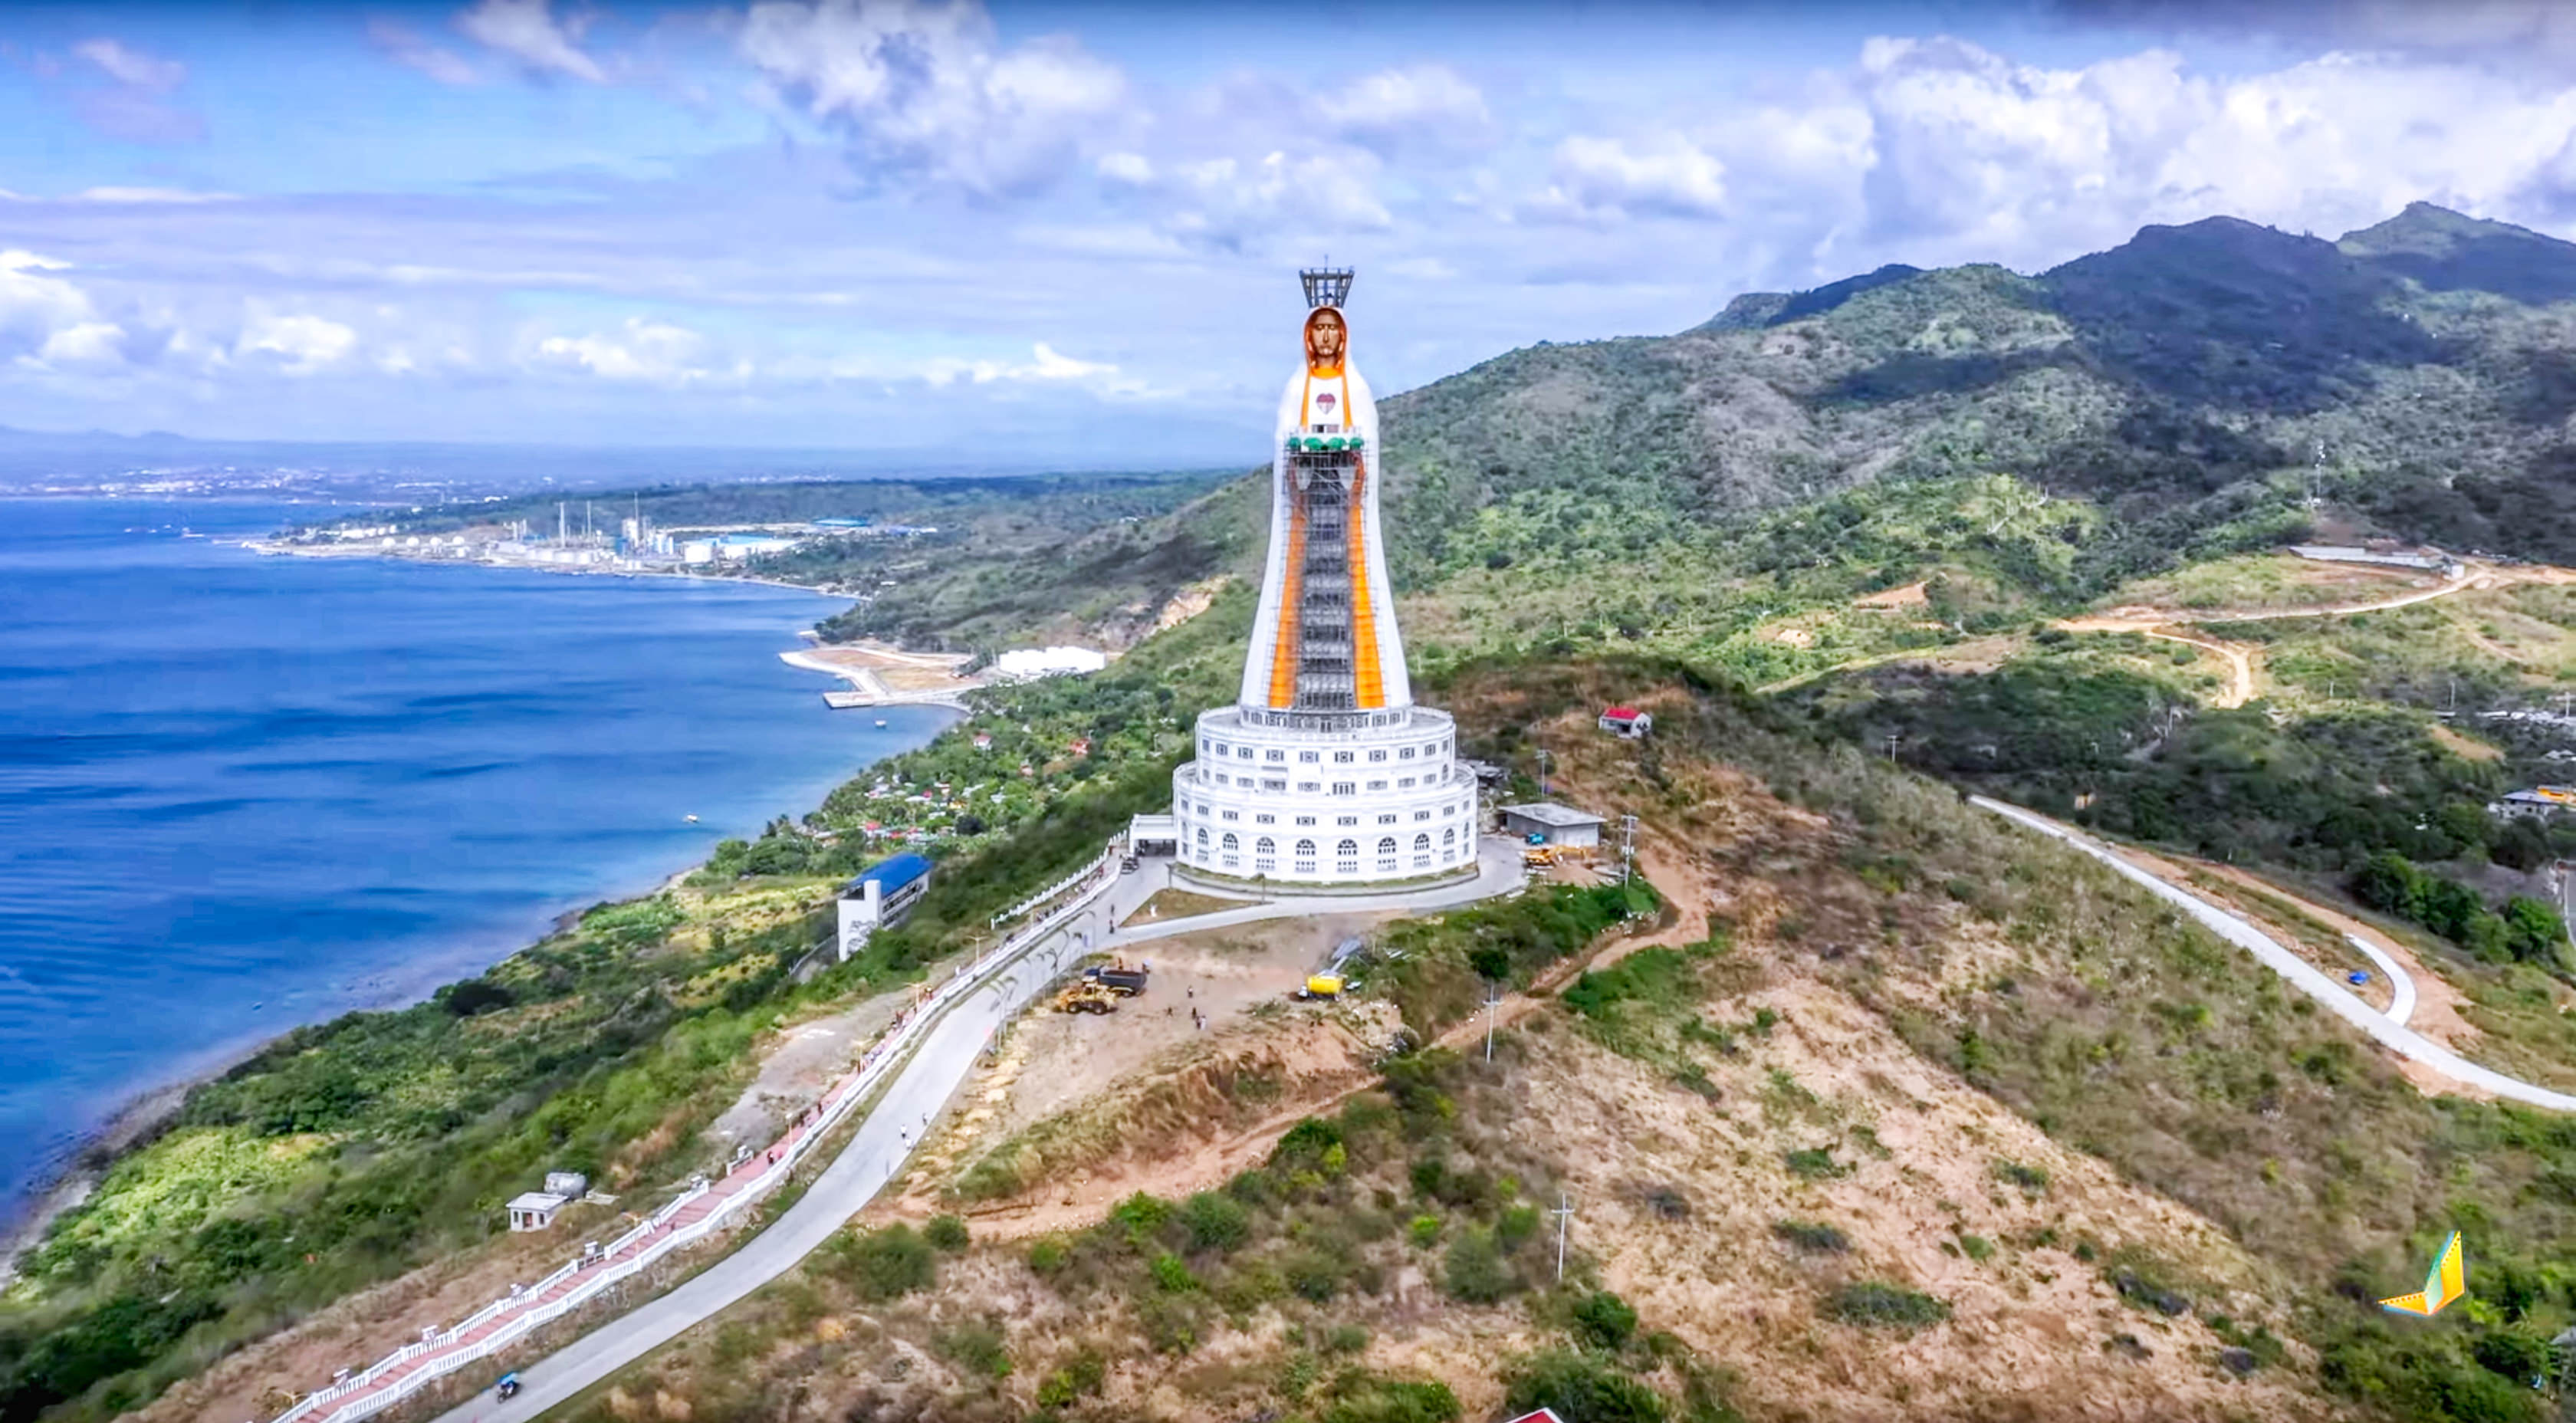 statue-of-mary-mother-of-all-asia-at-montemaria-batangas-philippines-aerial-view-project-lupad.jpeg